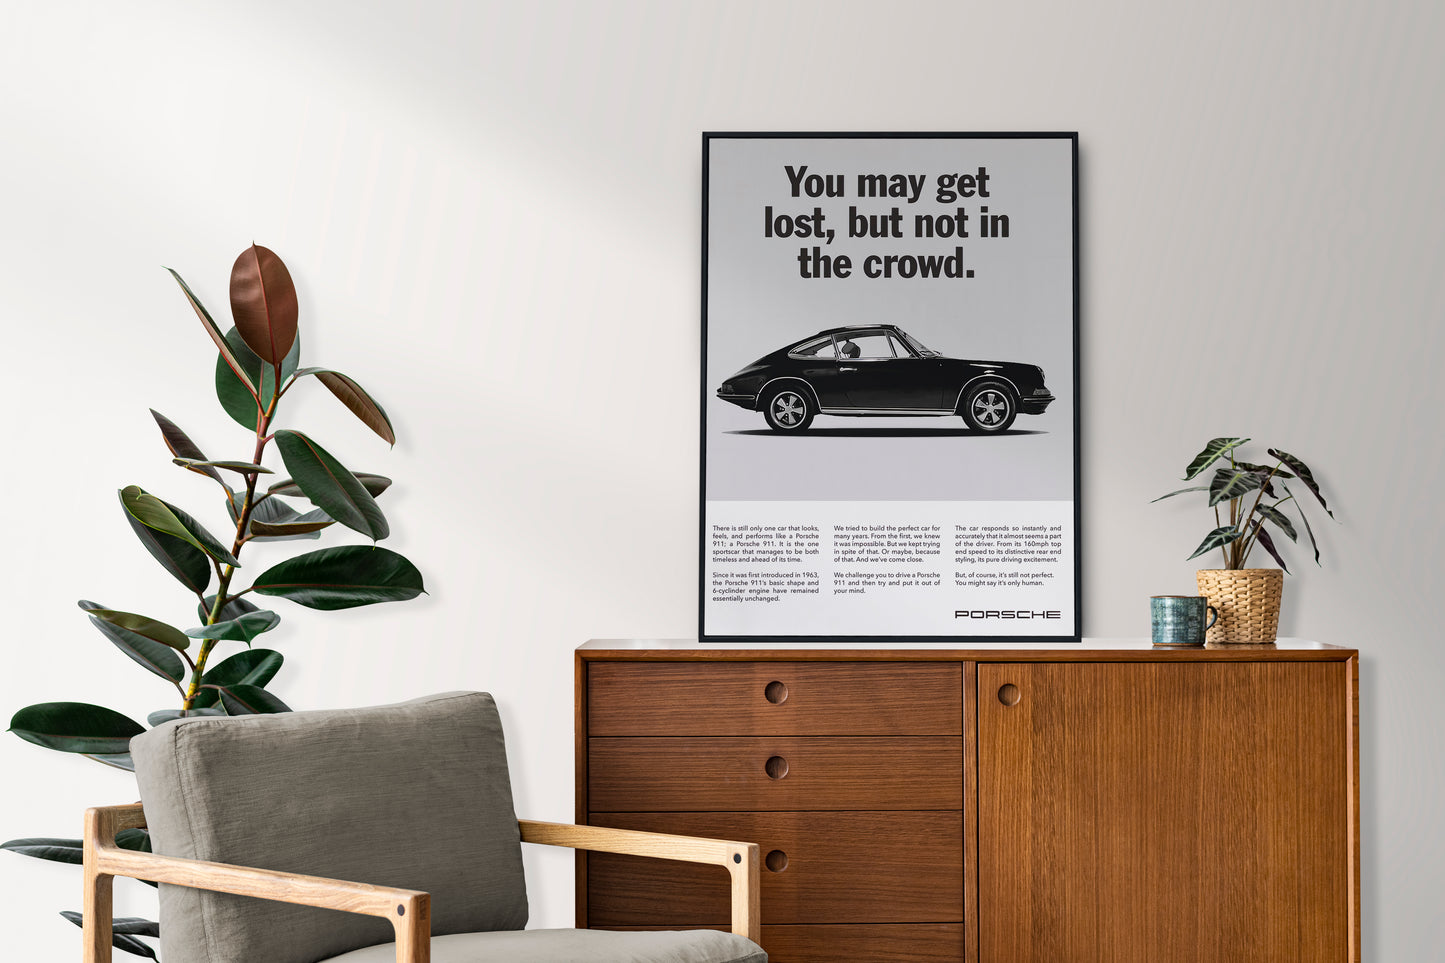 Porsche "You May Get Lost, But Not In The Crowd" Poster